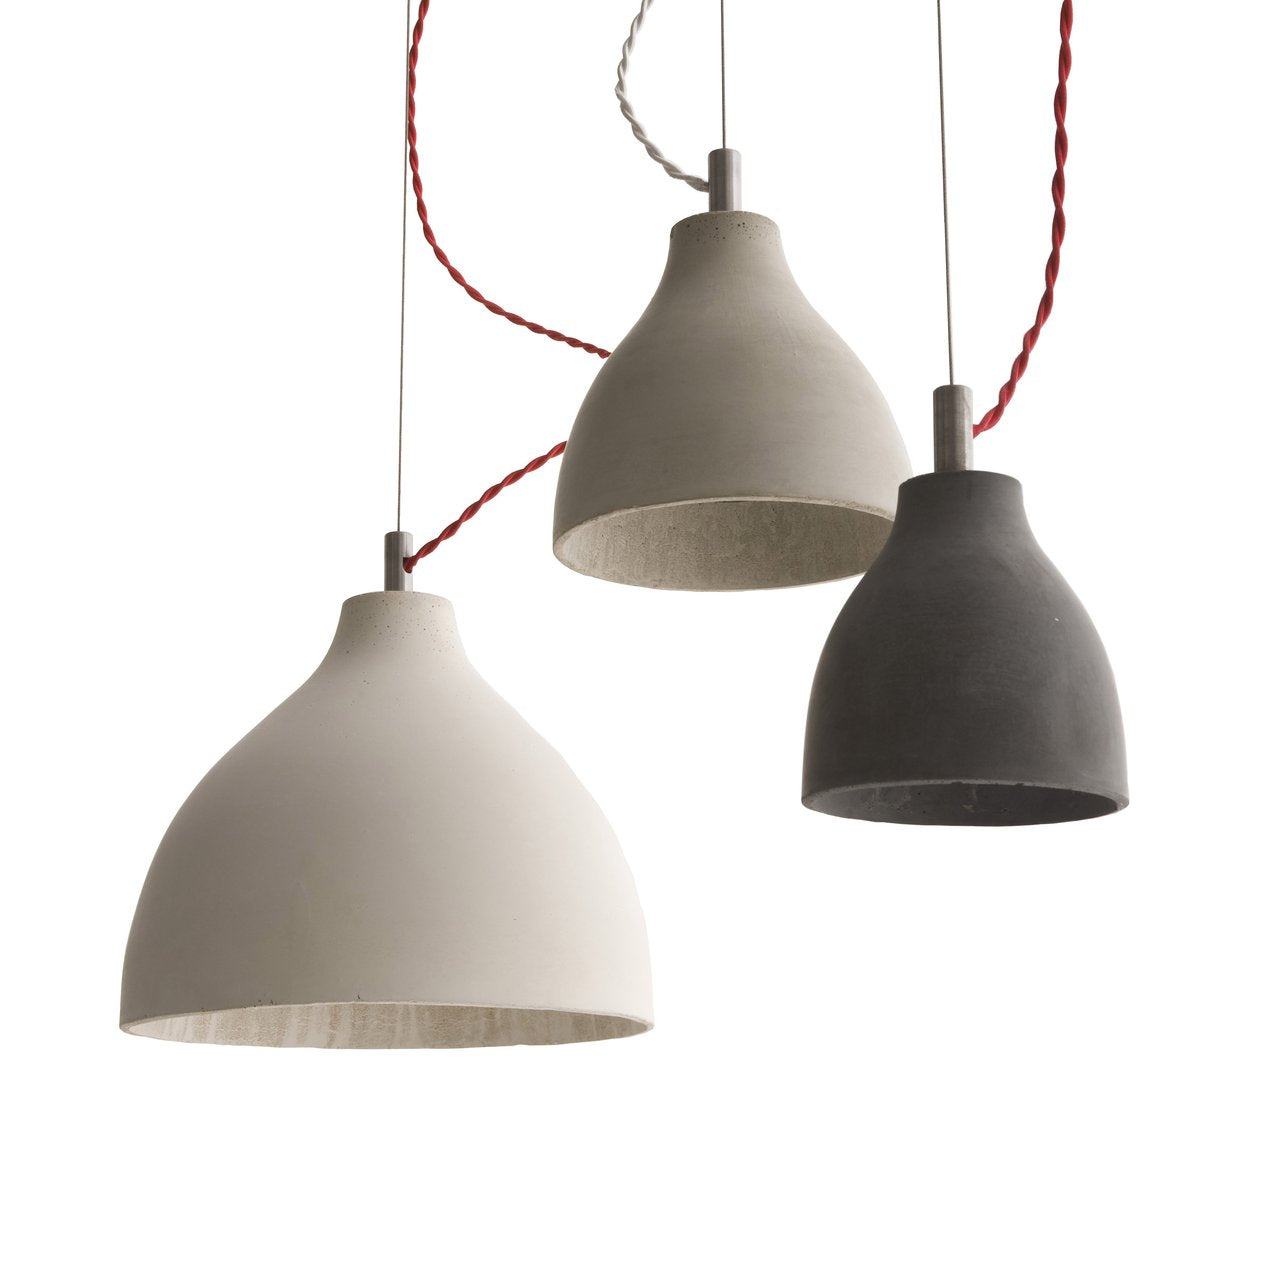 Decode | Heavy Pendant Light - Small White - Shade Only